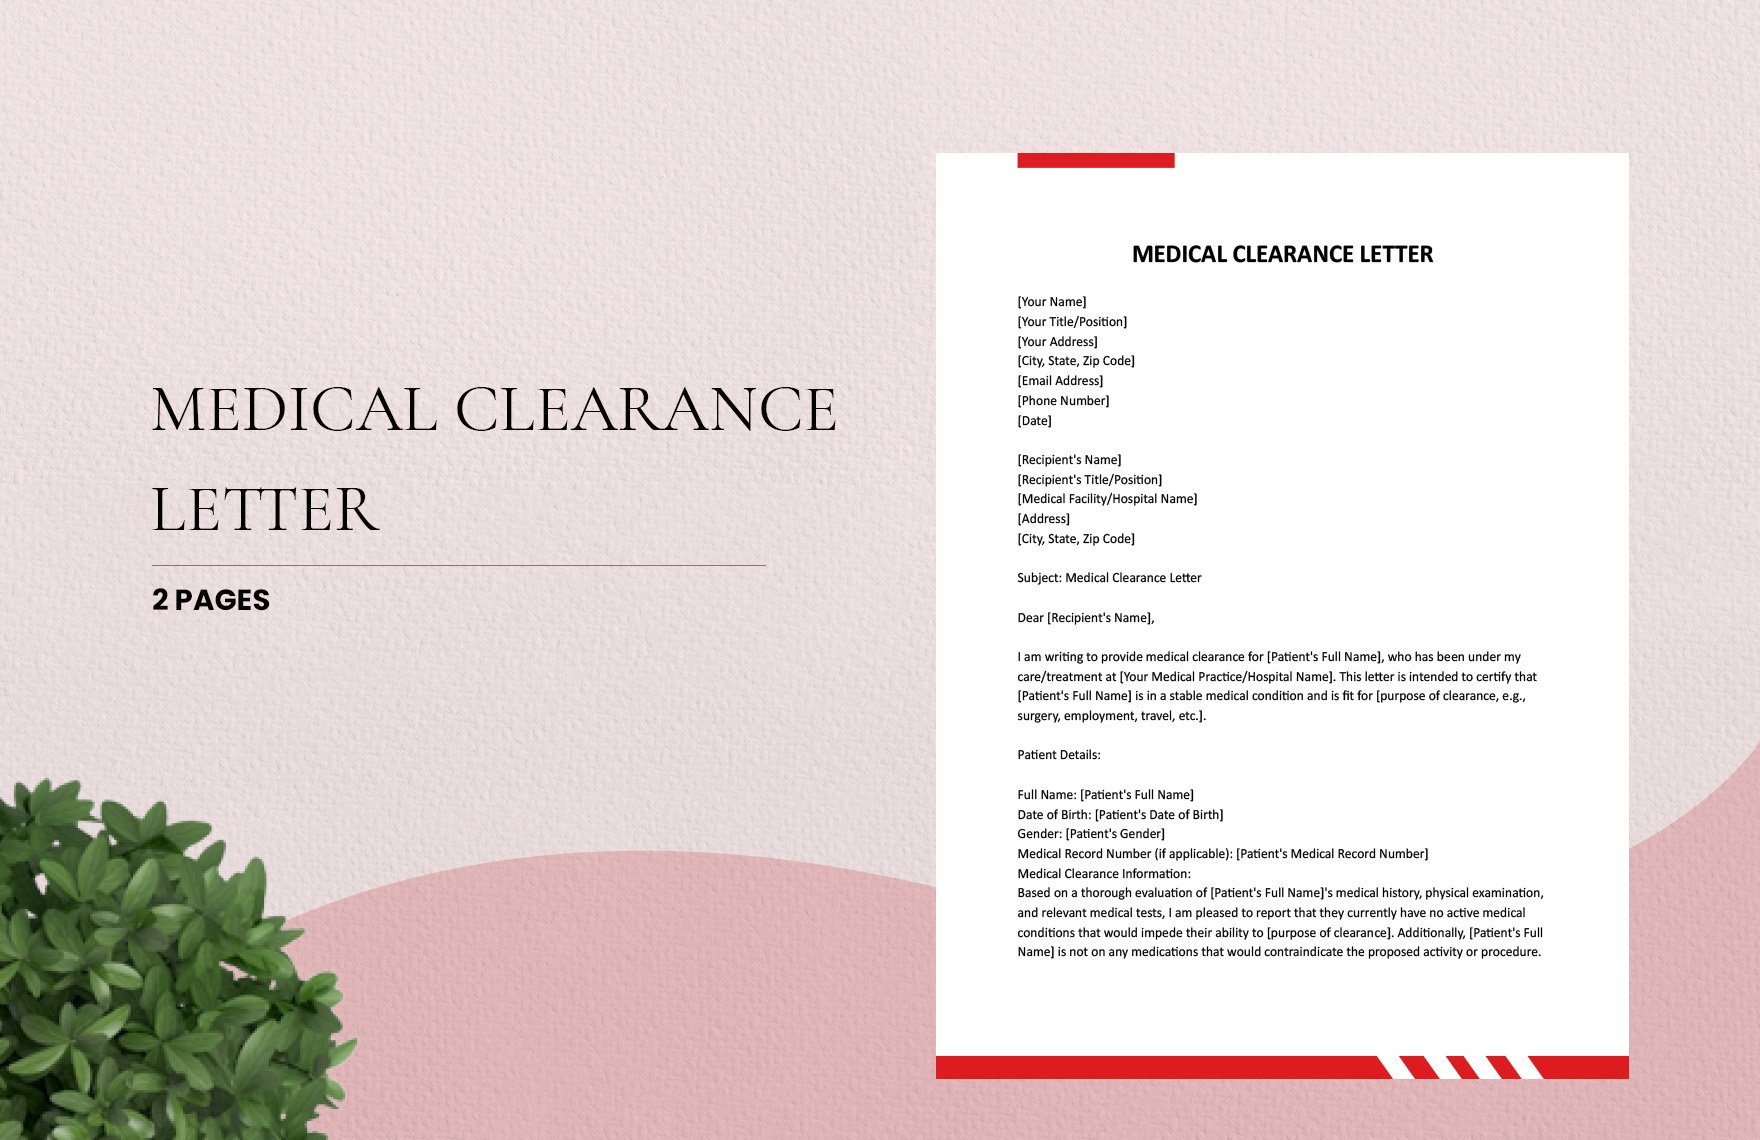 Medical Clearance Letter in Word, Google Docs, Apple Pages